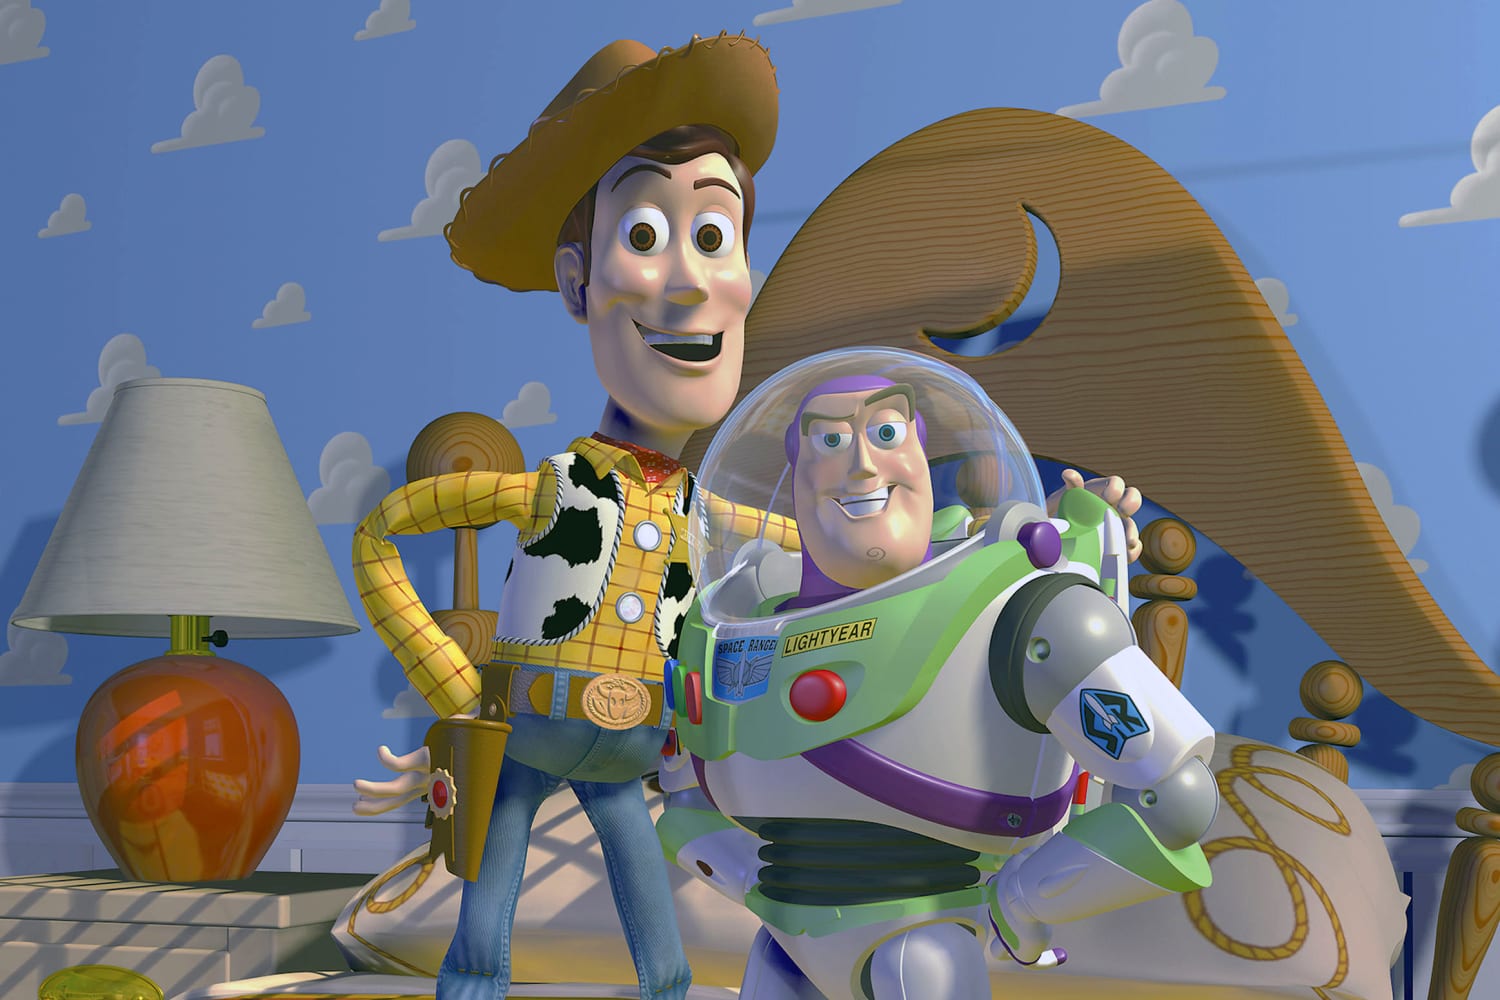 Disney confirms Toy Story 5, Frozen III, & Zootopia 2 are in the works